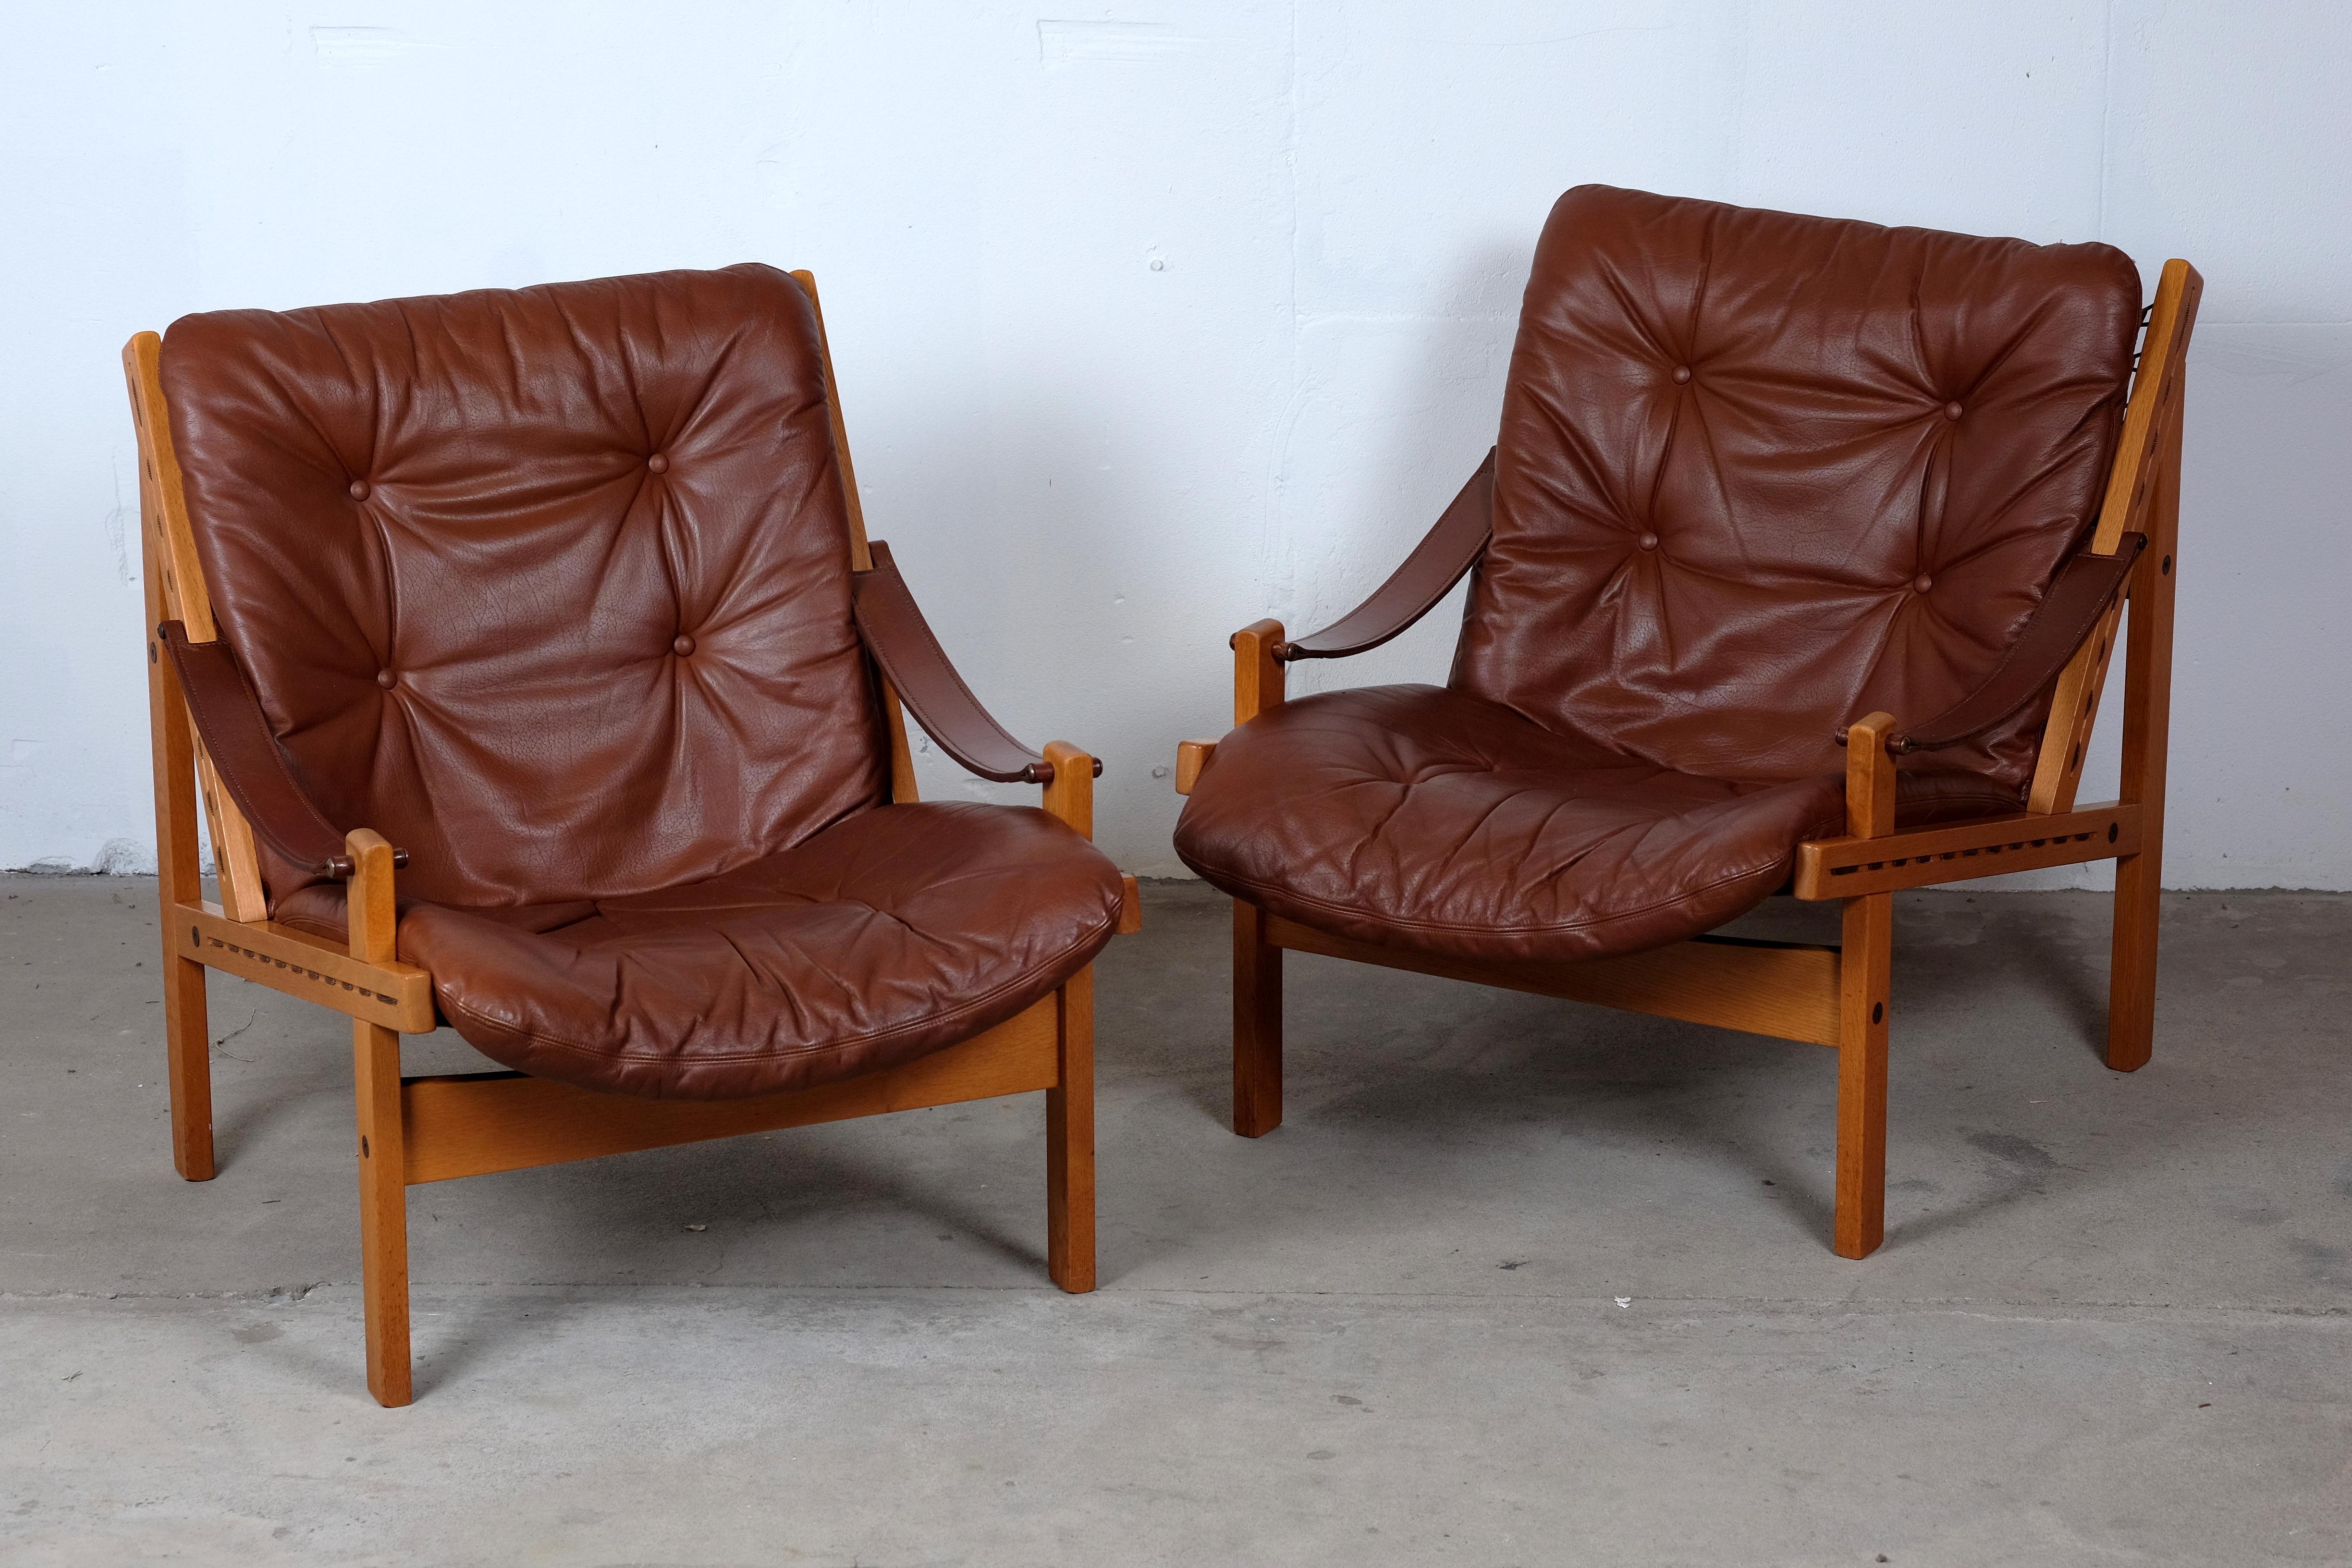 This amazing set of Hunter Safari chairs by Torbjörn Afdal was designed for Bruksbo Norwegen, in the 1960s. The chair are made of beautiful oak and teak seats are covered with leather. Considering its age both of the chairs is in very good vintage